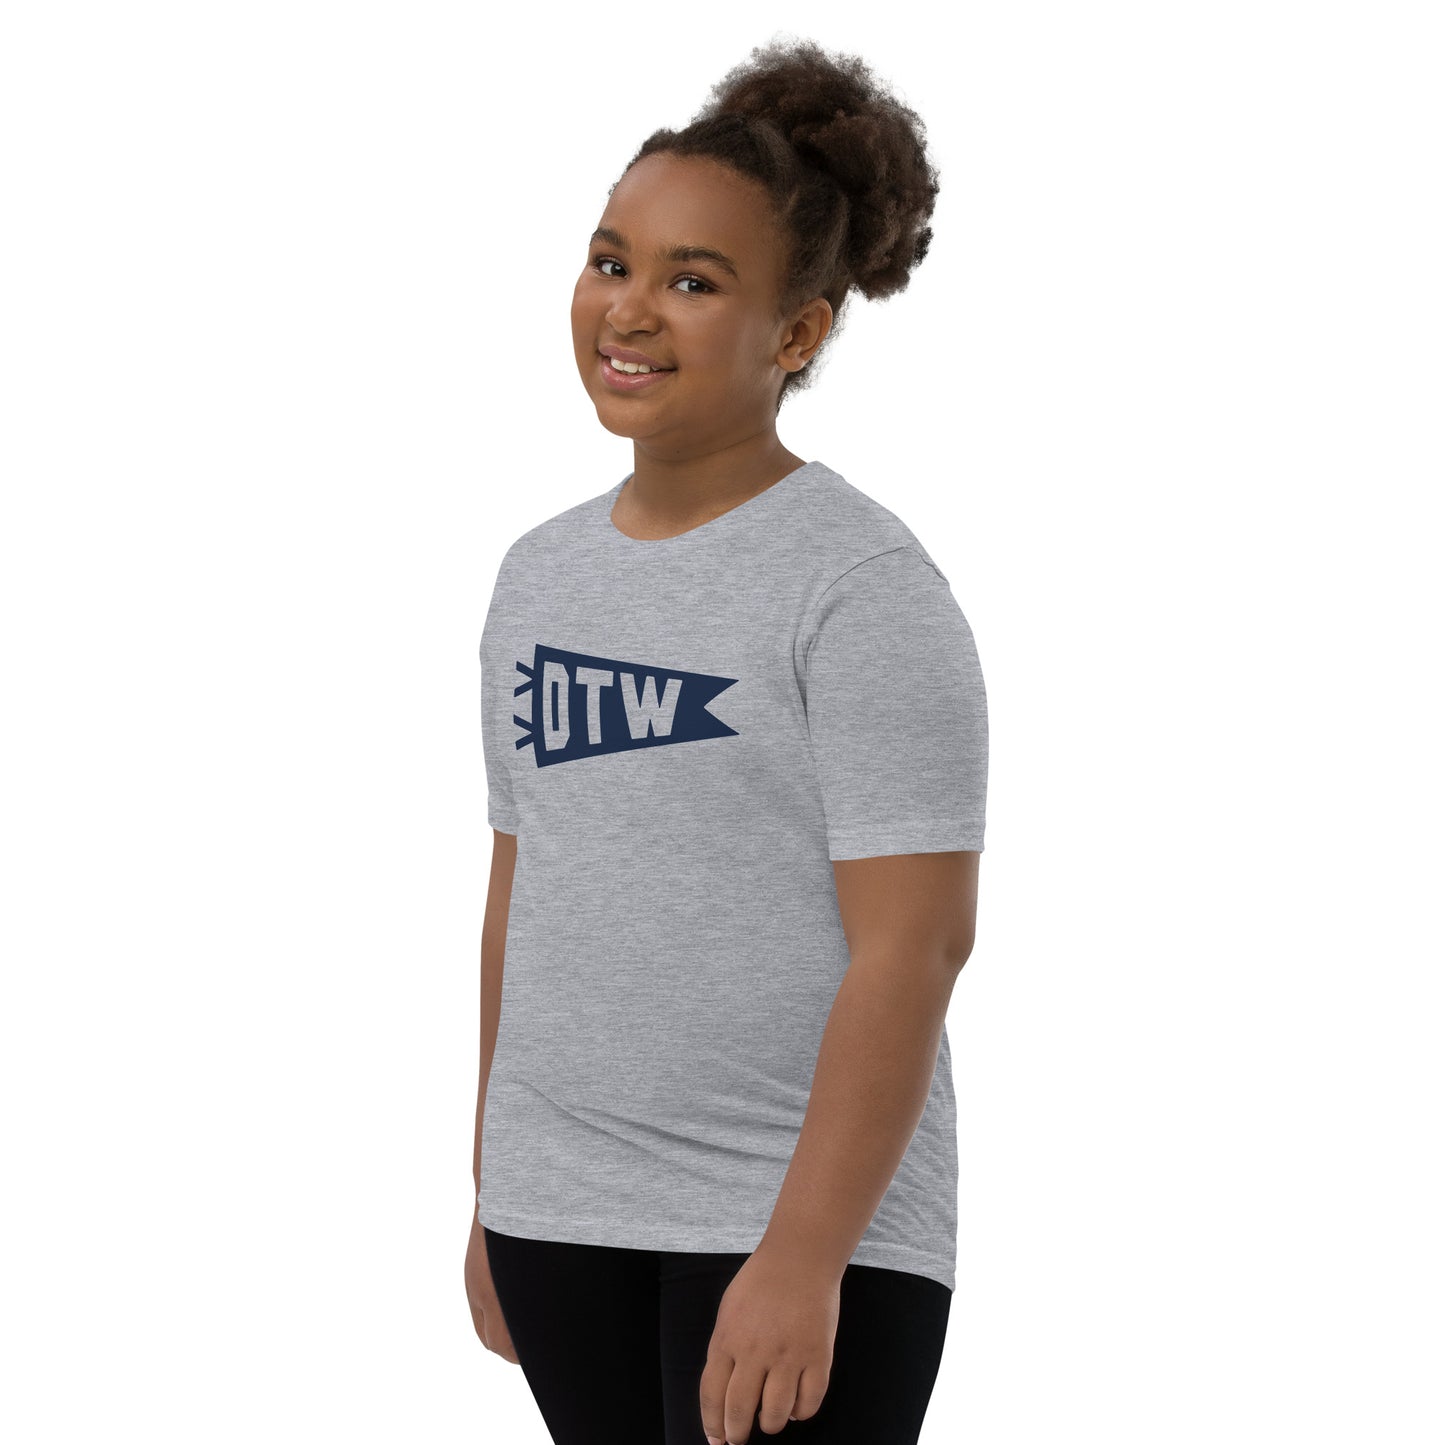 Kid's Airport Code Tee - Navy Blue Graphic • DTW Detroit • YHM Designs - Image 04